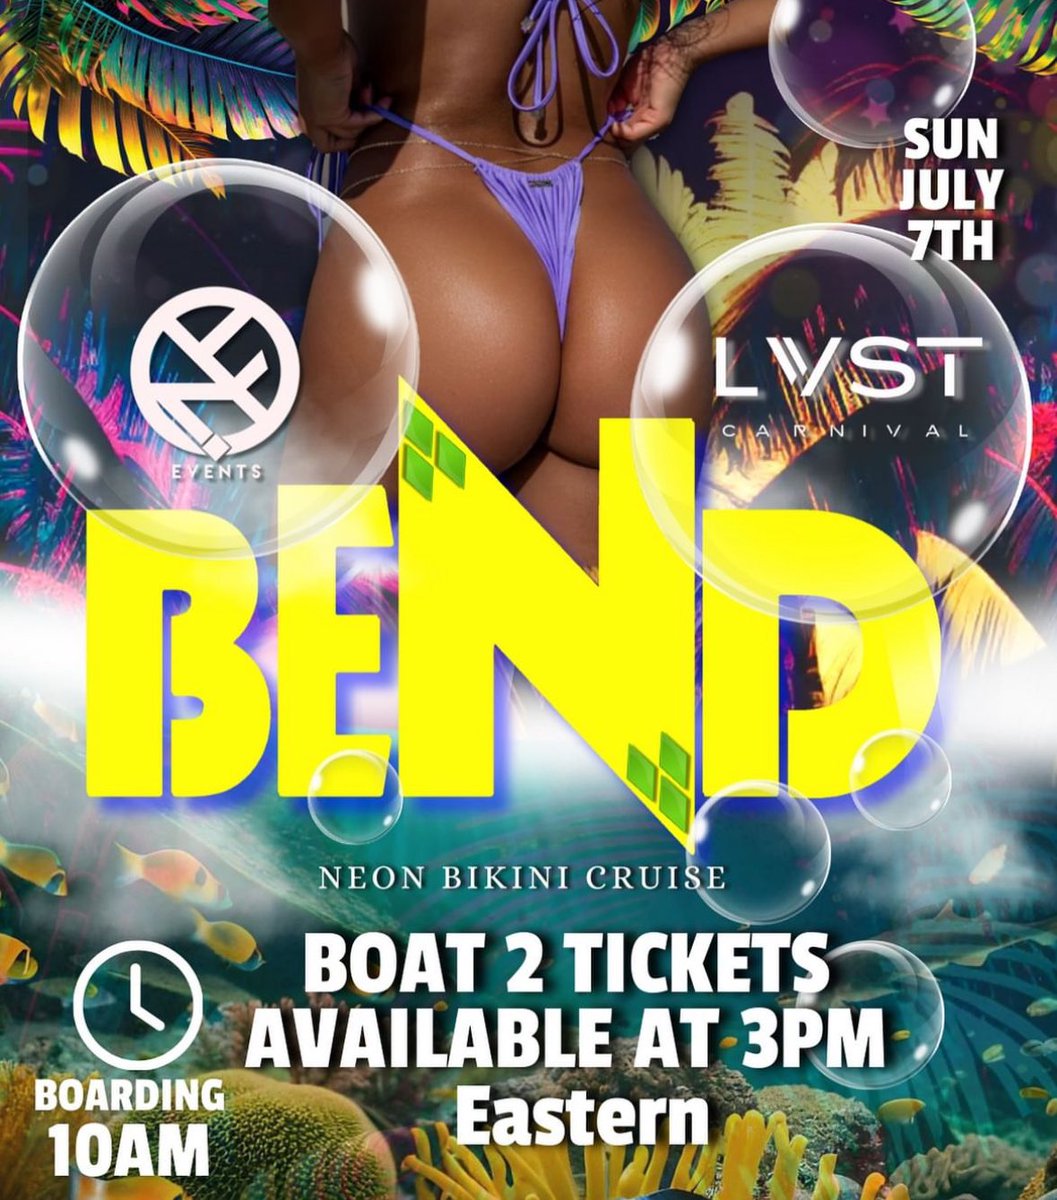 Who doesn’t love a boatride ? Secure your tickets for boat 2

frontlineticketing.com/BENDSVG?fbclid…